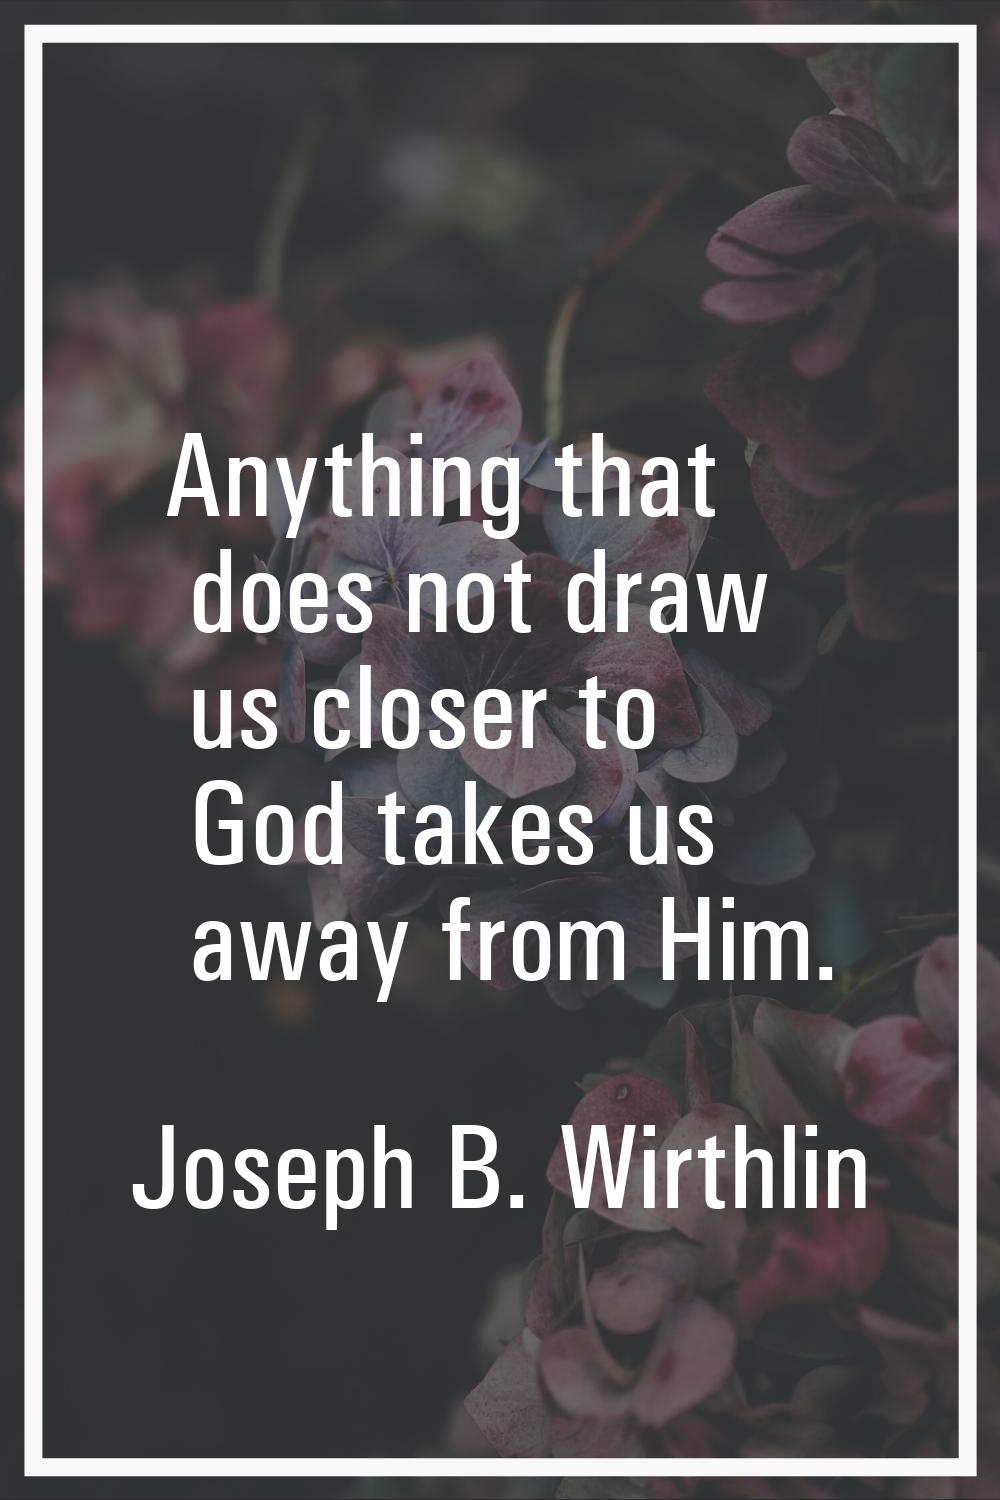 Anything that does not draw us closer to God takes us away from Him.